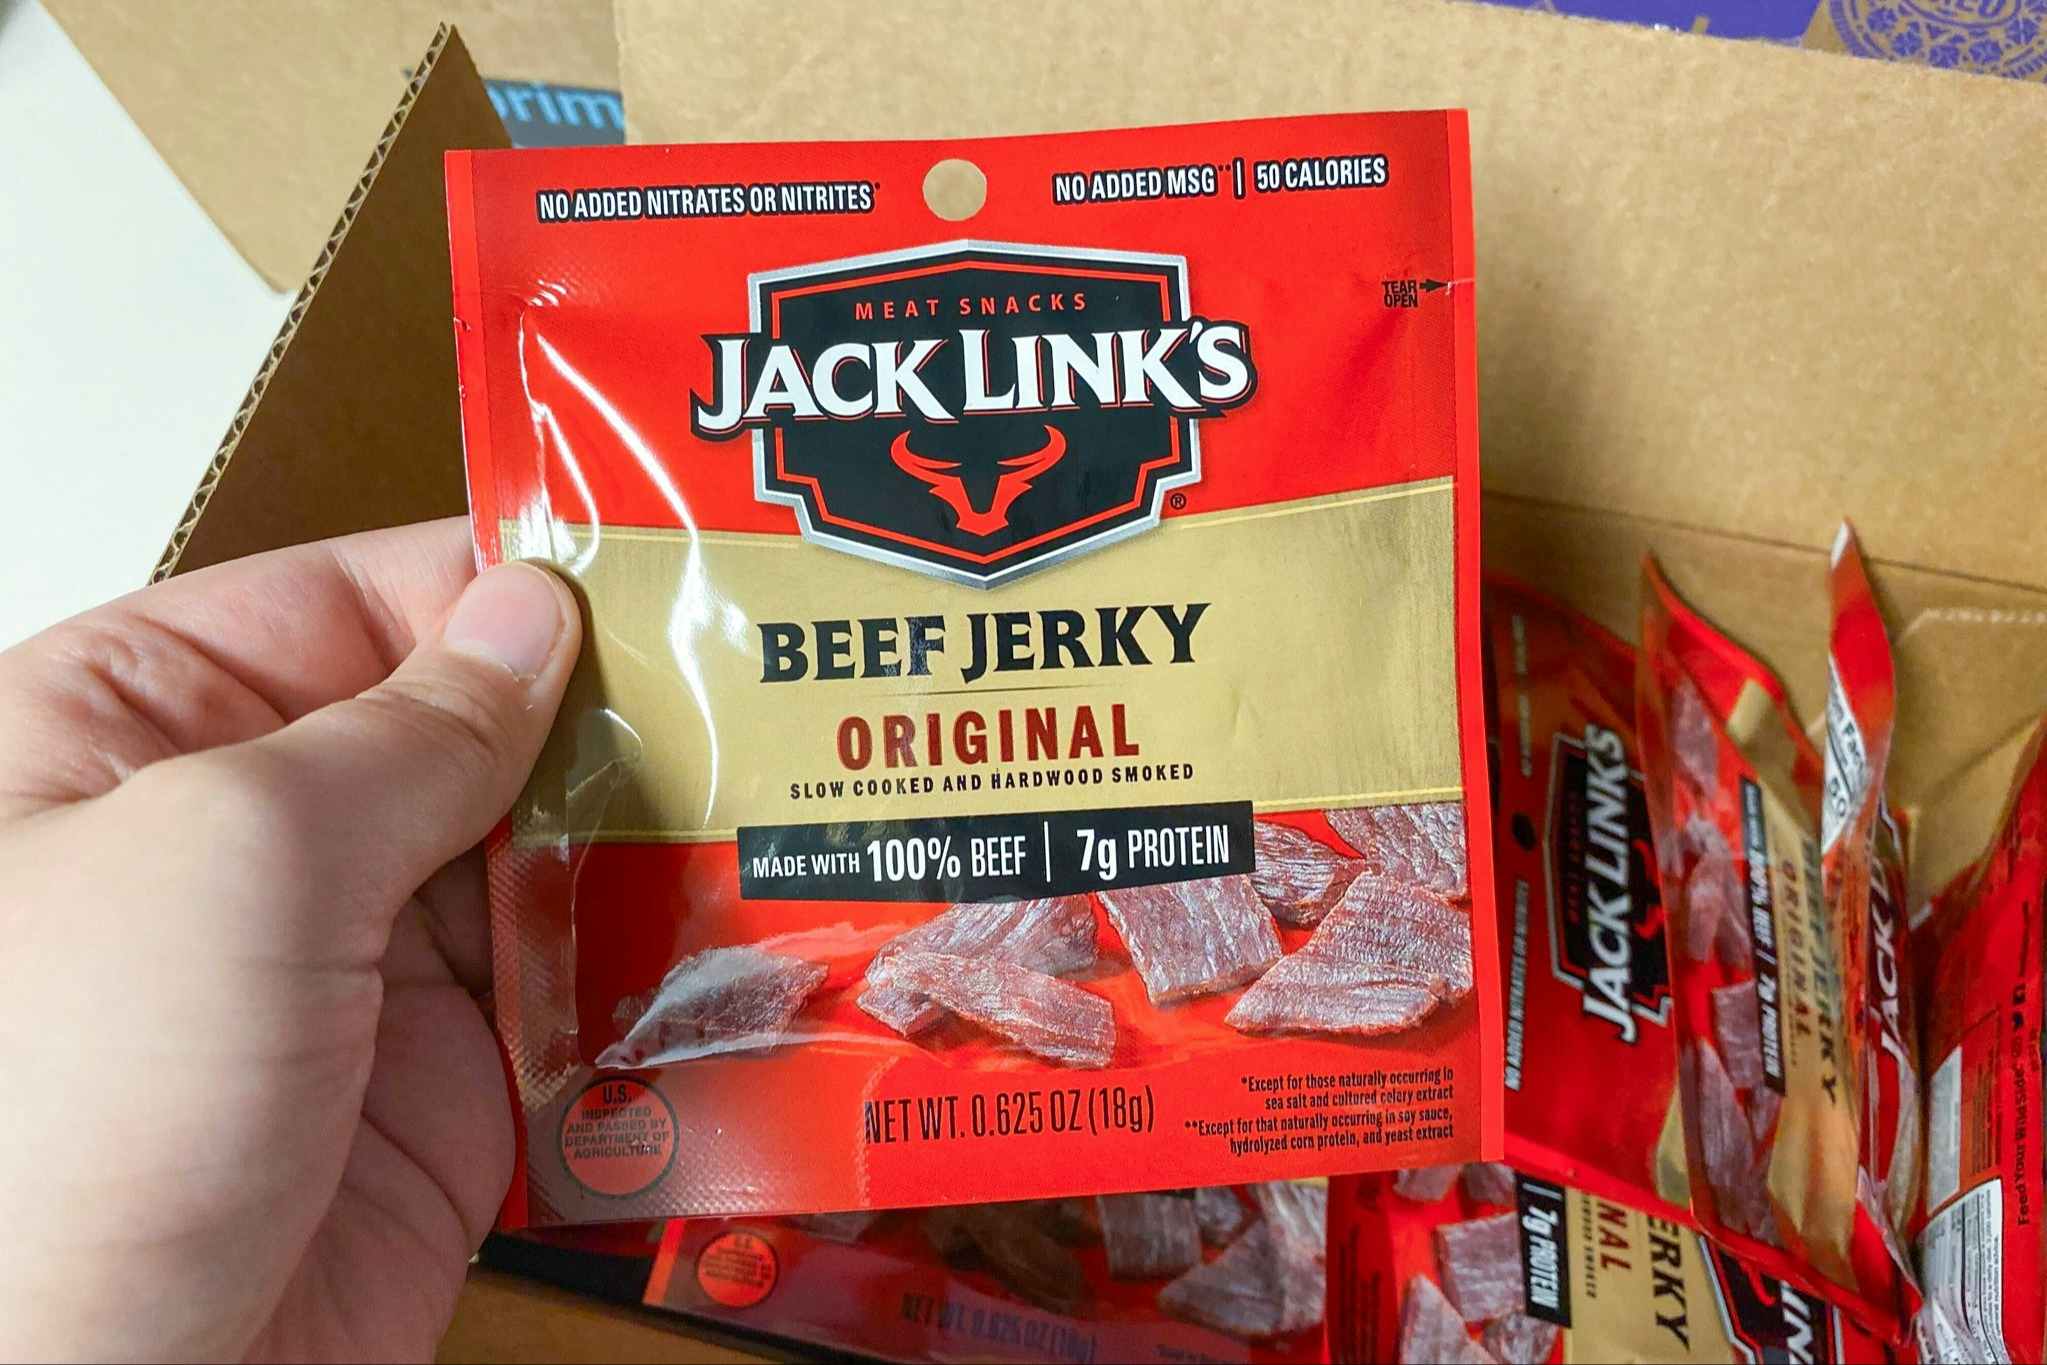 Jack Link's Beef Jerky 9-Pack, as Low as $7.50 on Amazon 